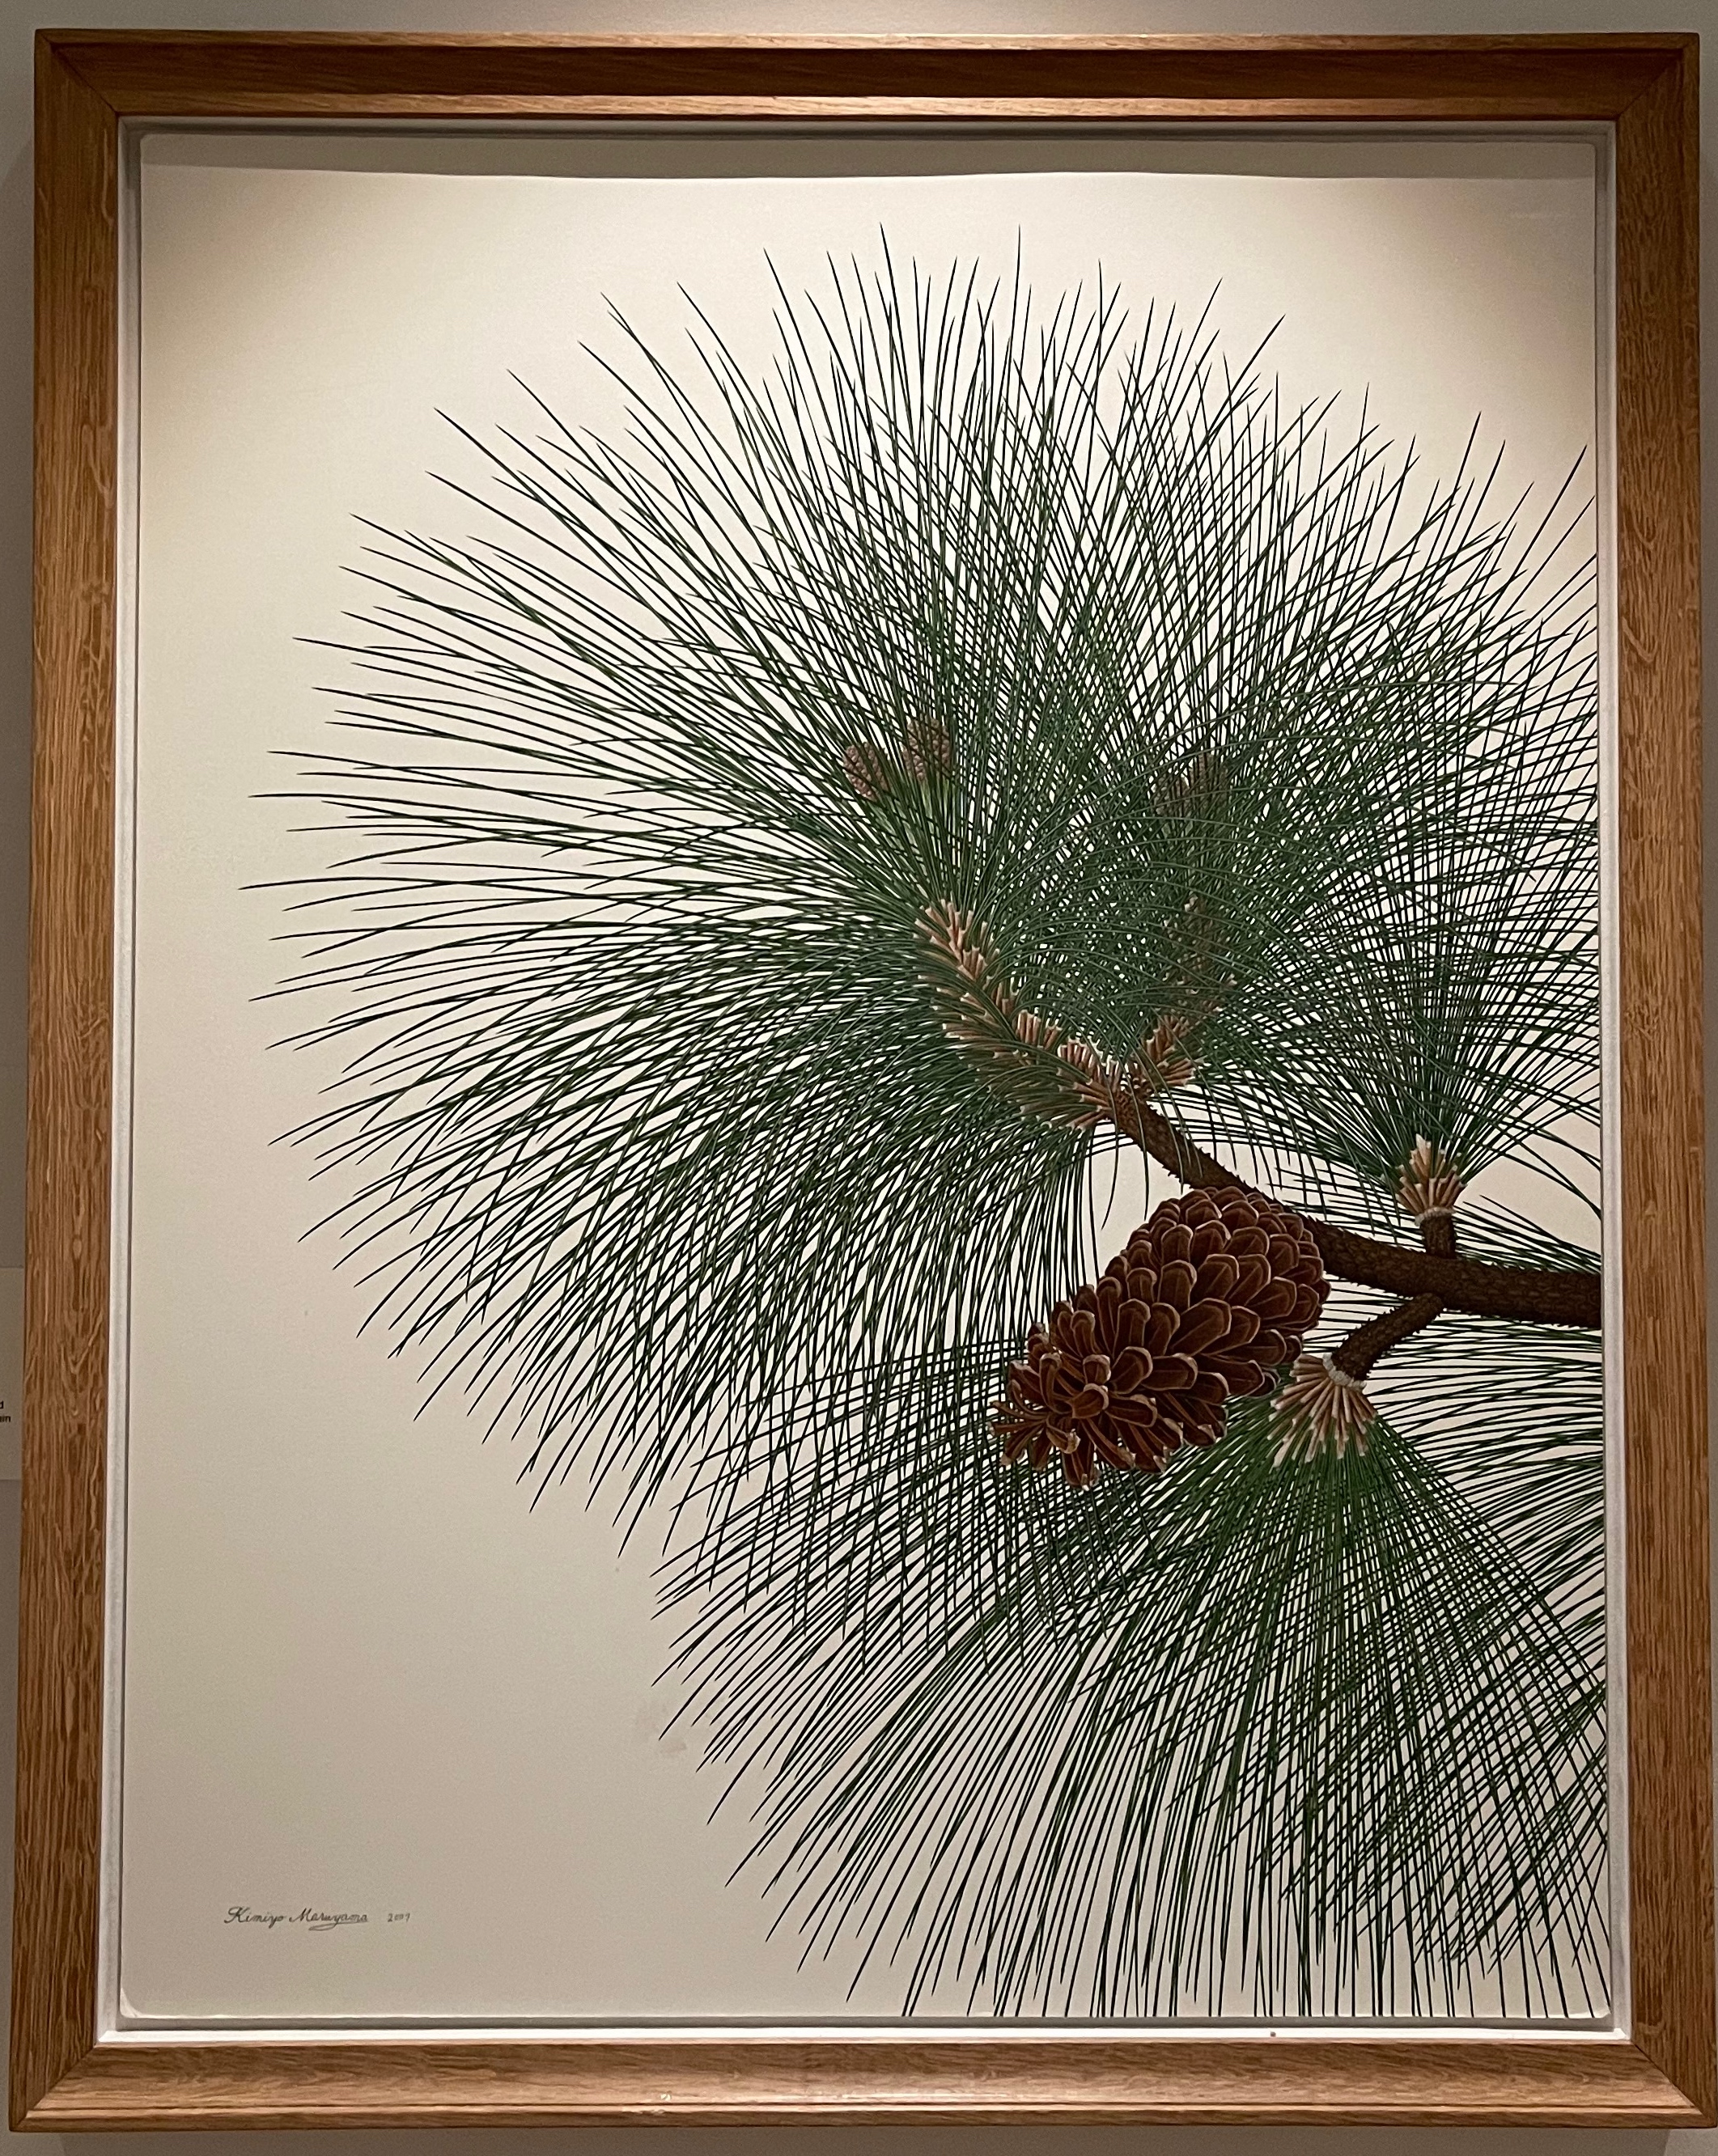 Illustration of Broom pine, showing overlapping needles and large pine cone